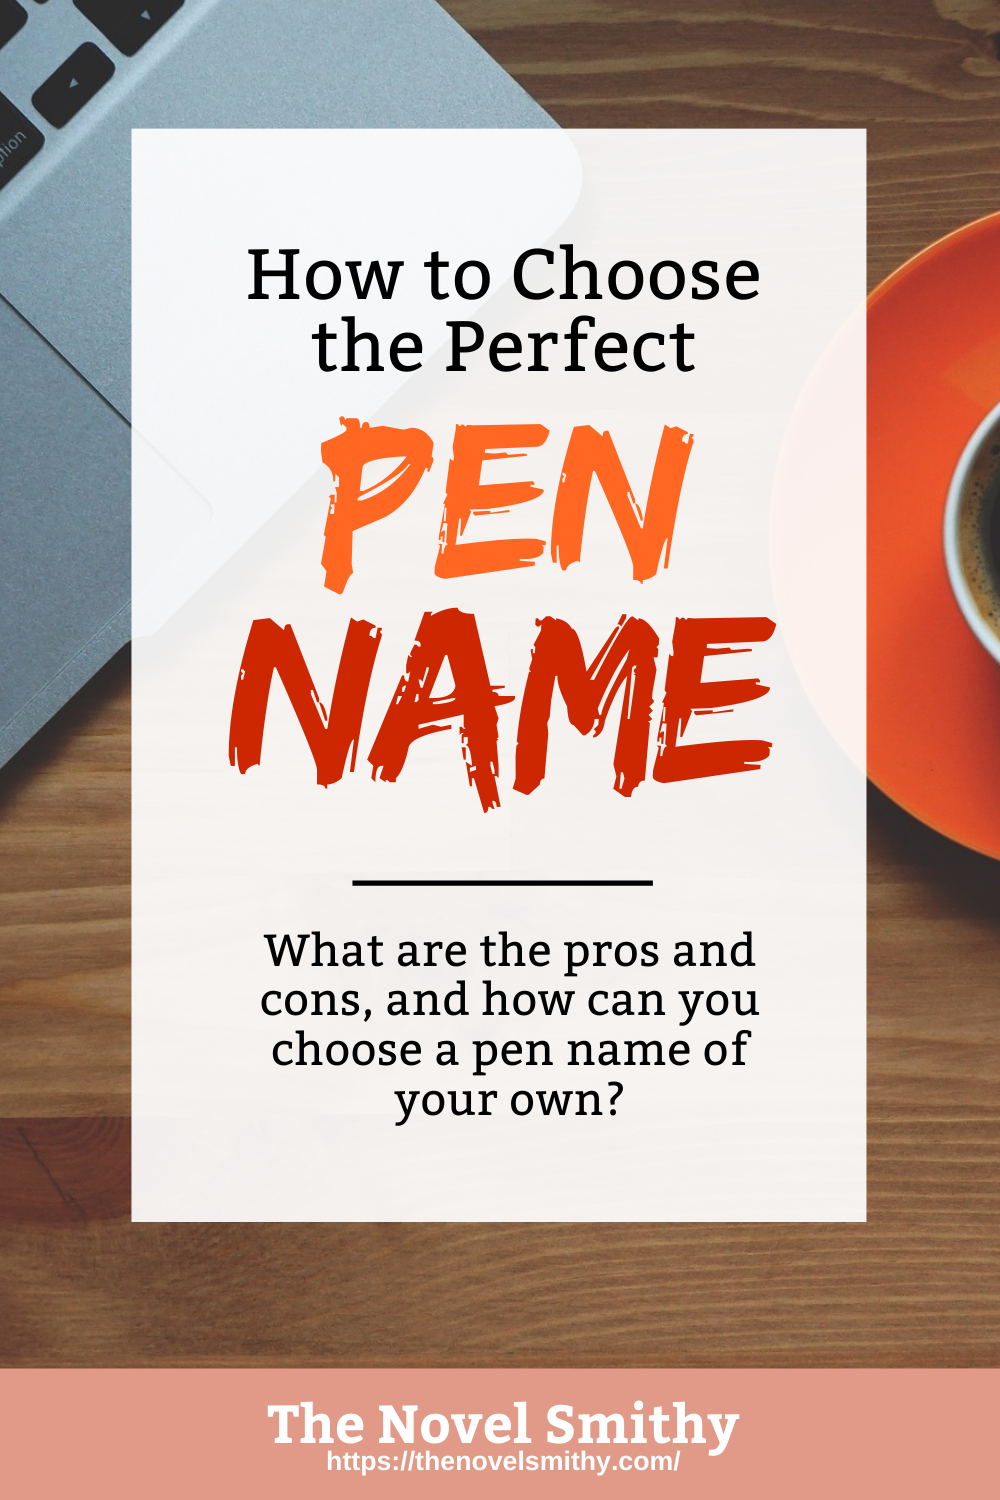 How to Choose the Perfect Pen Name